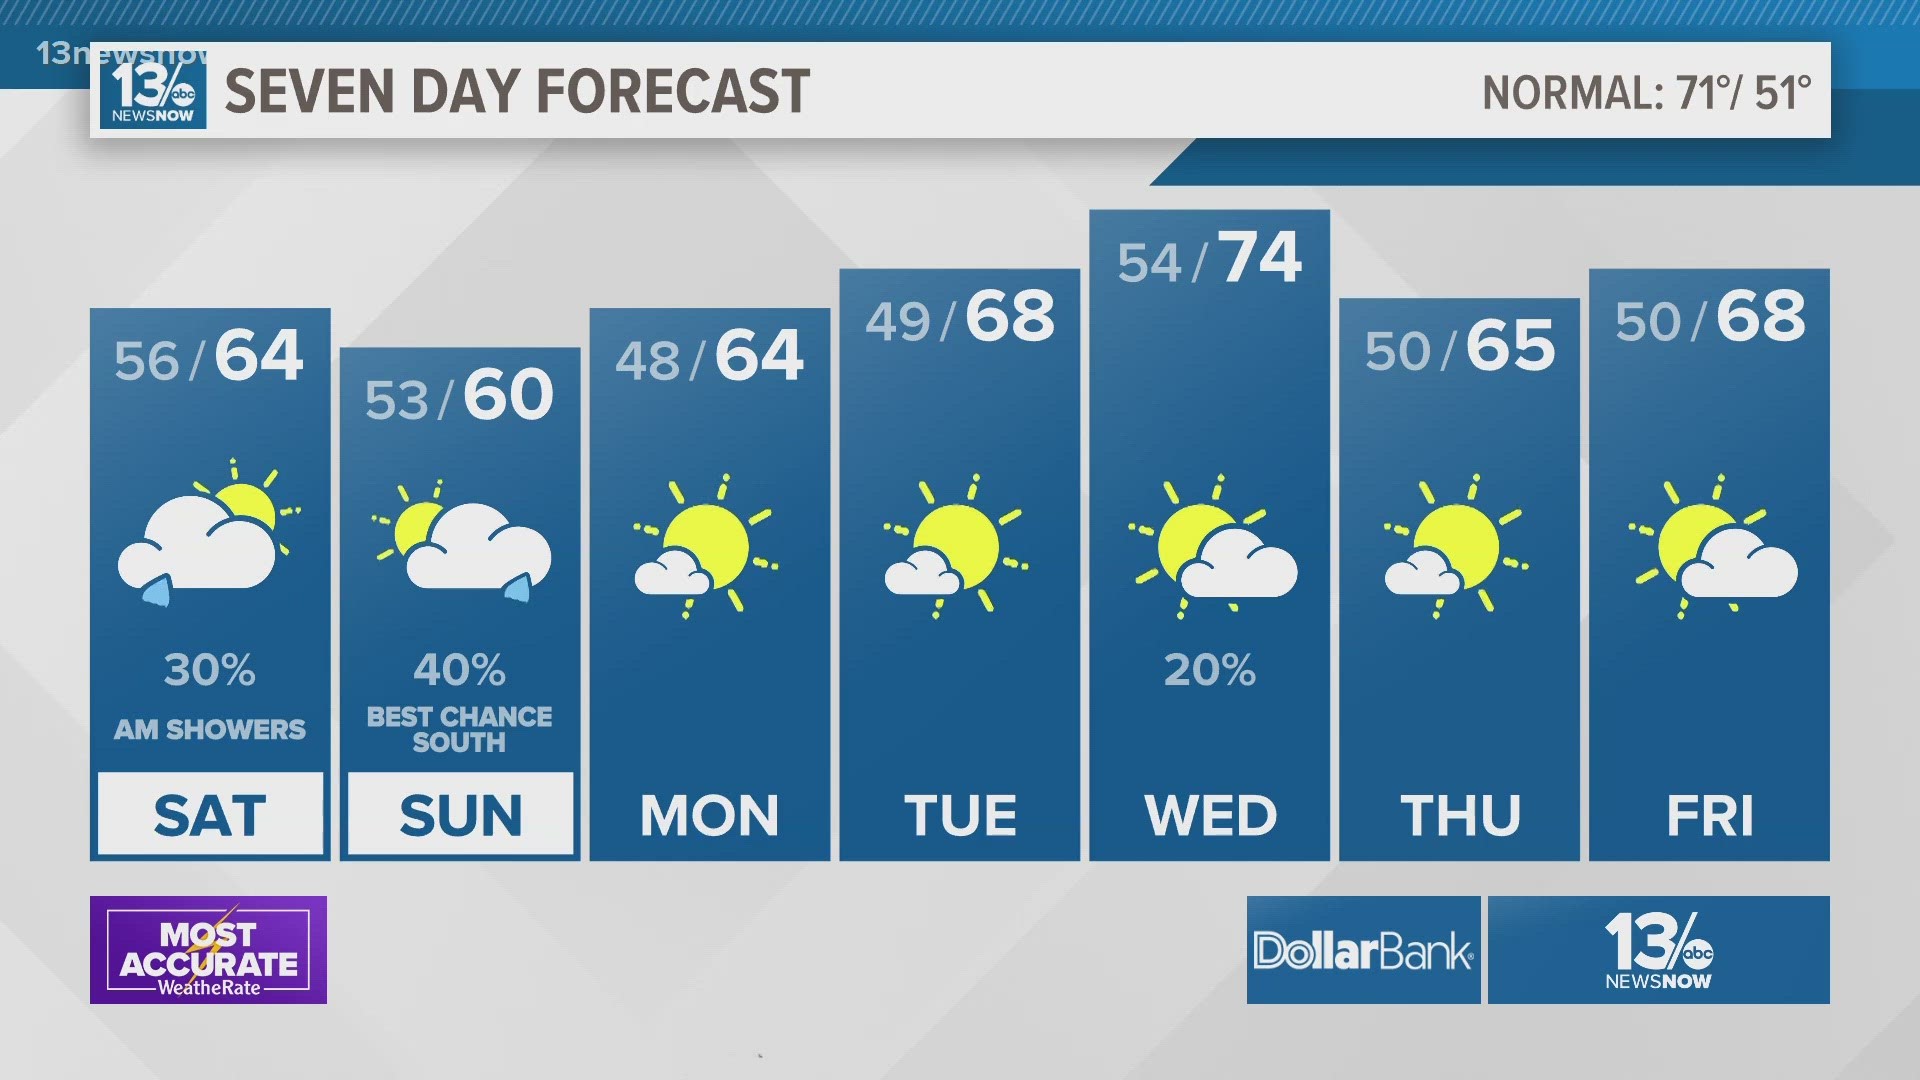 Highs will drop to 5-15° below normal through Monday.